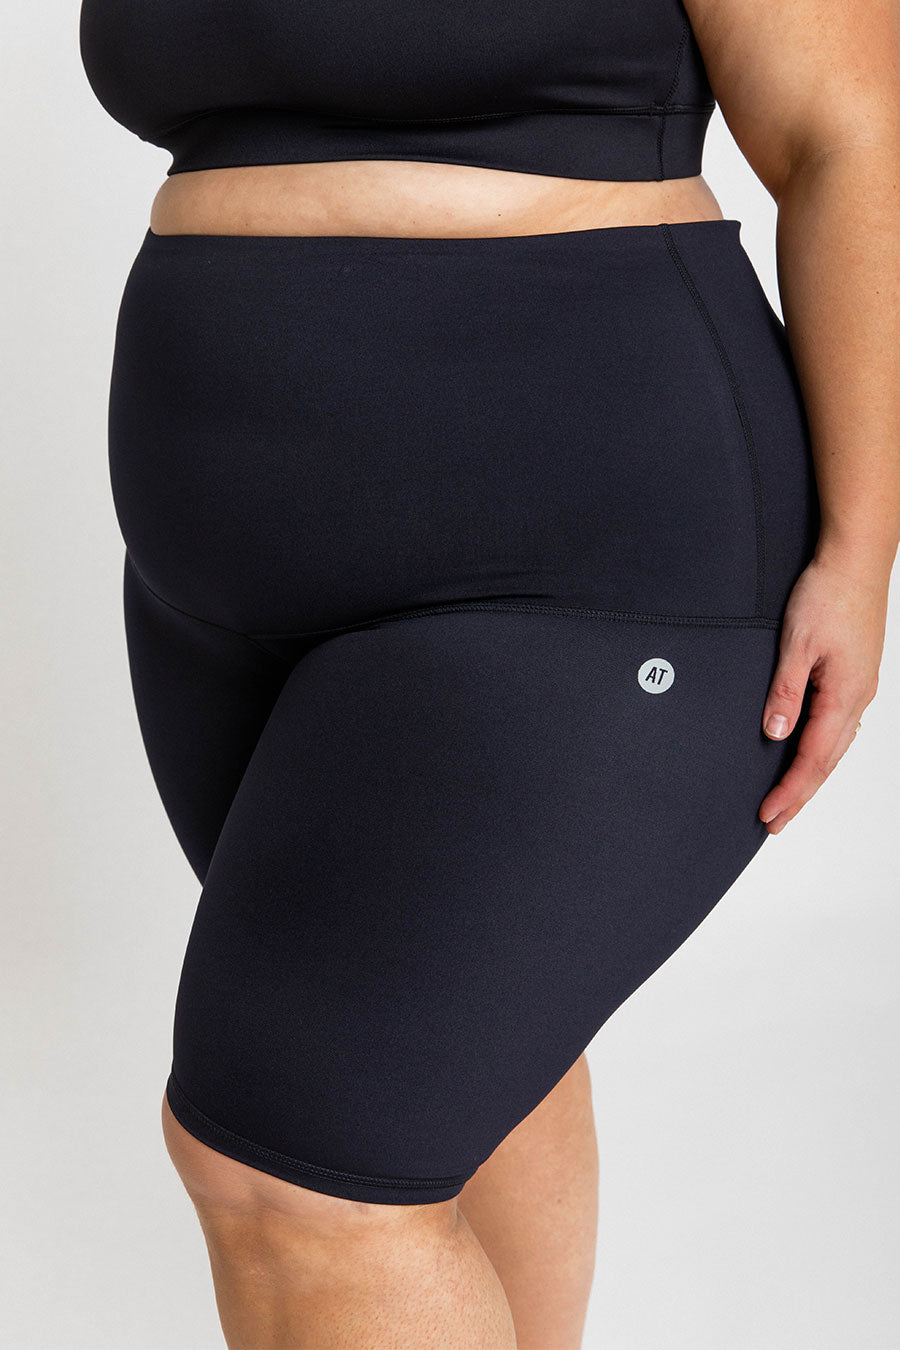 Recovery Support Bike Short - Black